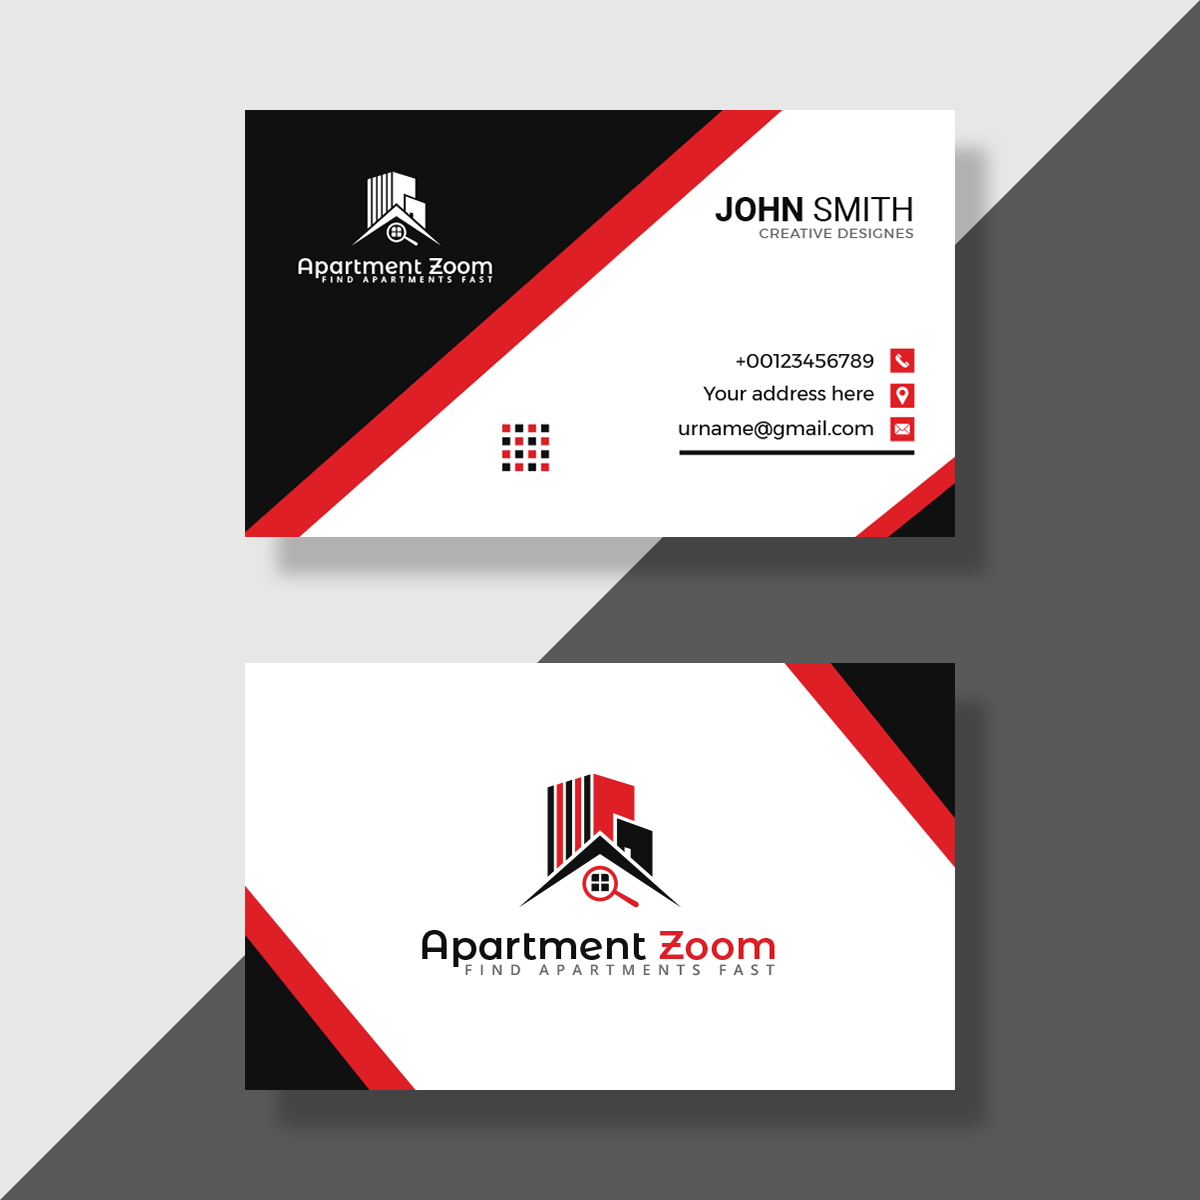 Business Card And Visiting Card Design For Print-Ready